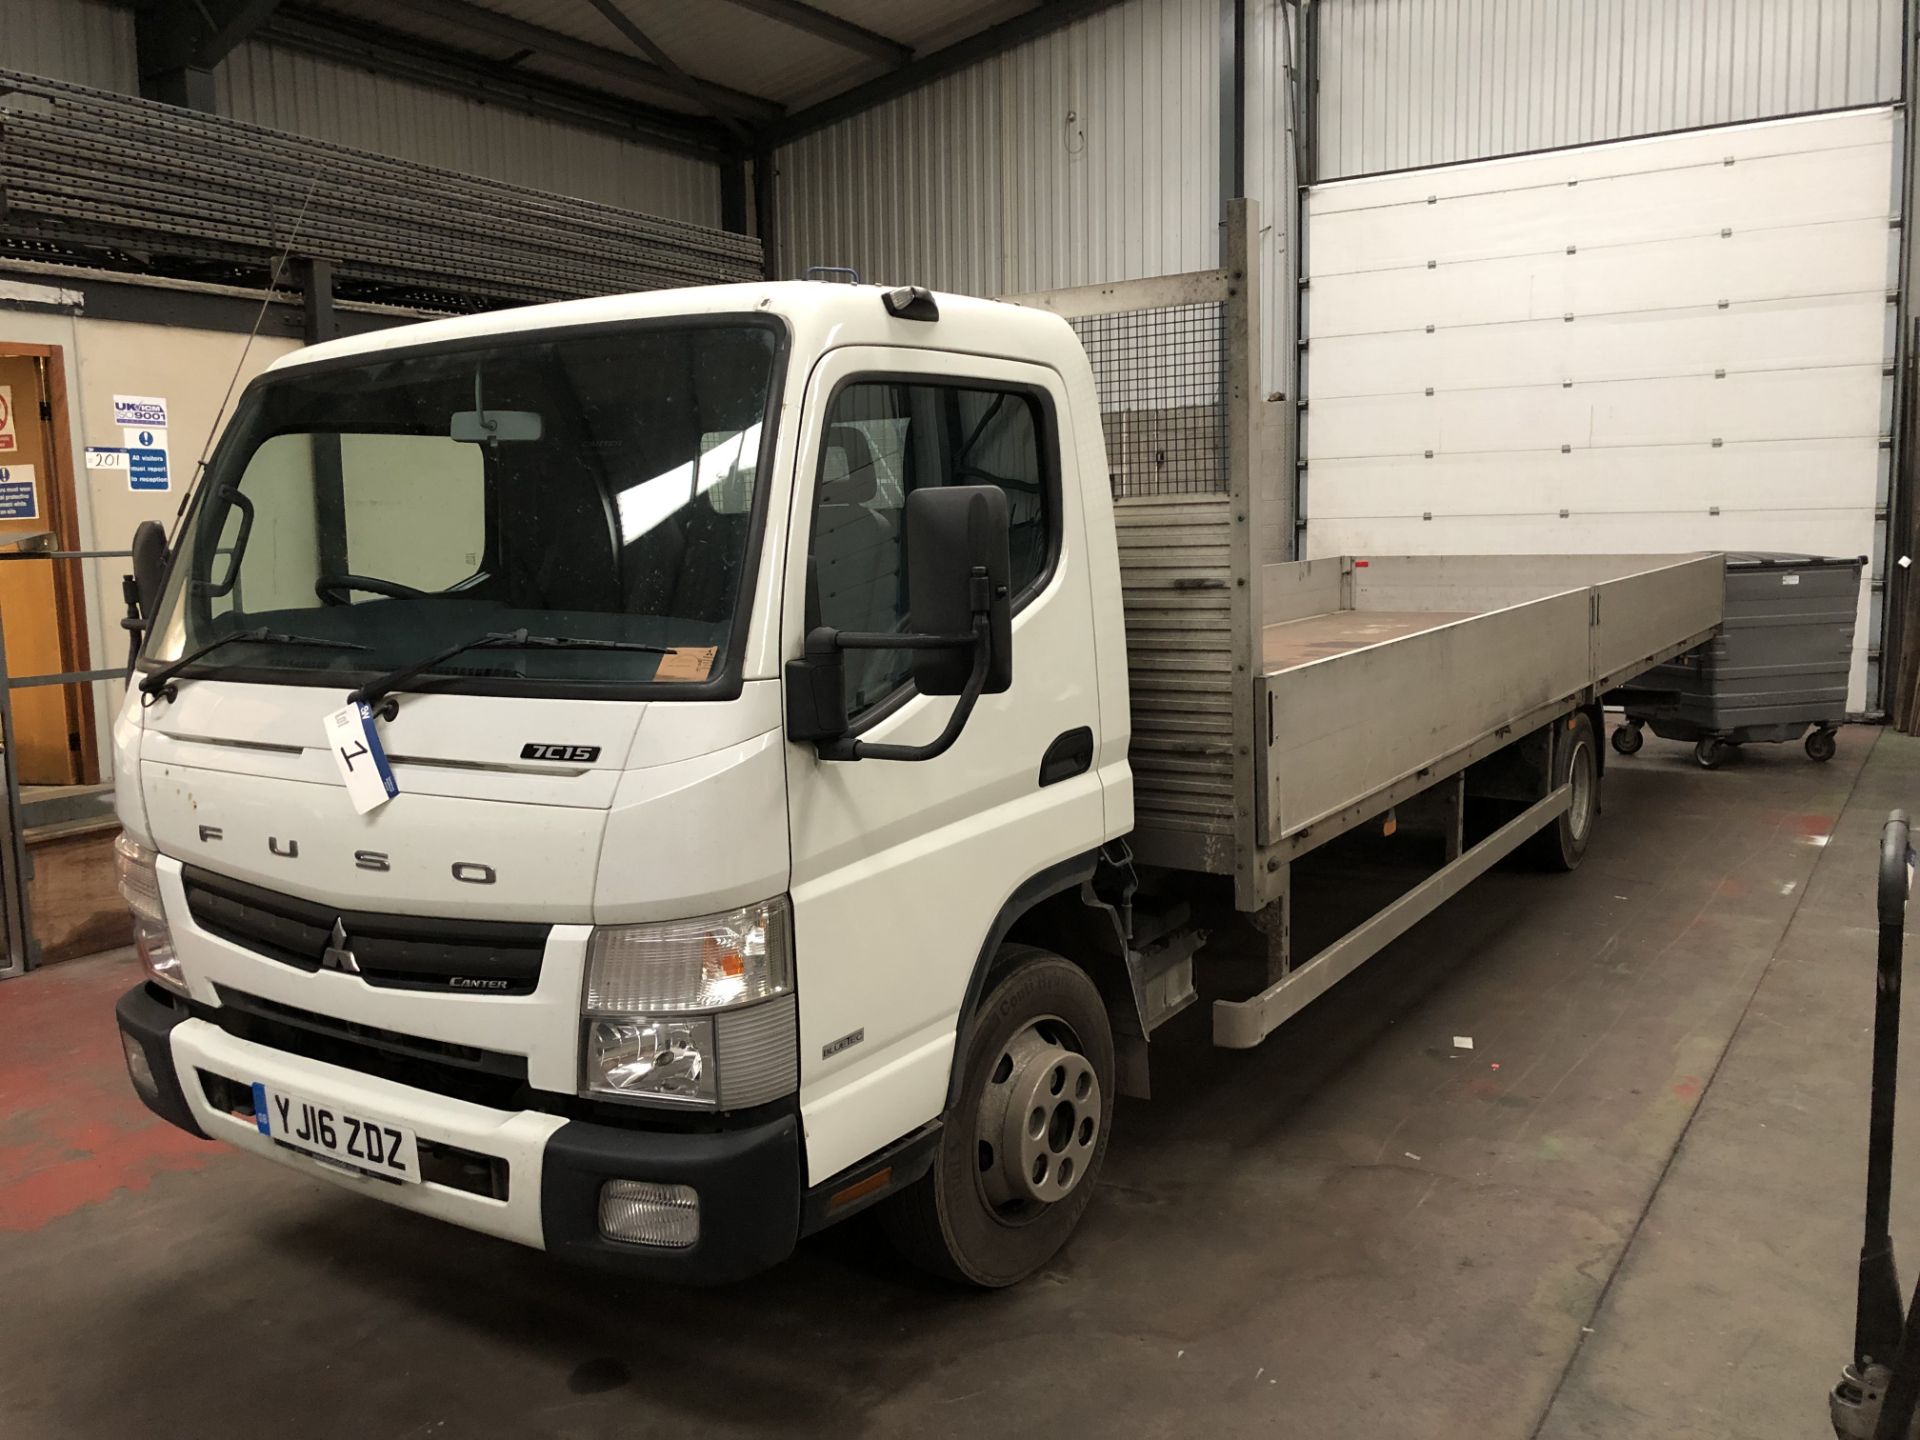 Mitsubishi Fuso Canter 7C15 LWB Dropside Truck, 7m Body, Registration Number: YJ16 ZDZ, First - Image 2 of 3